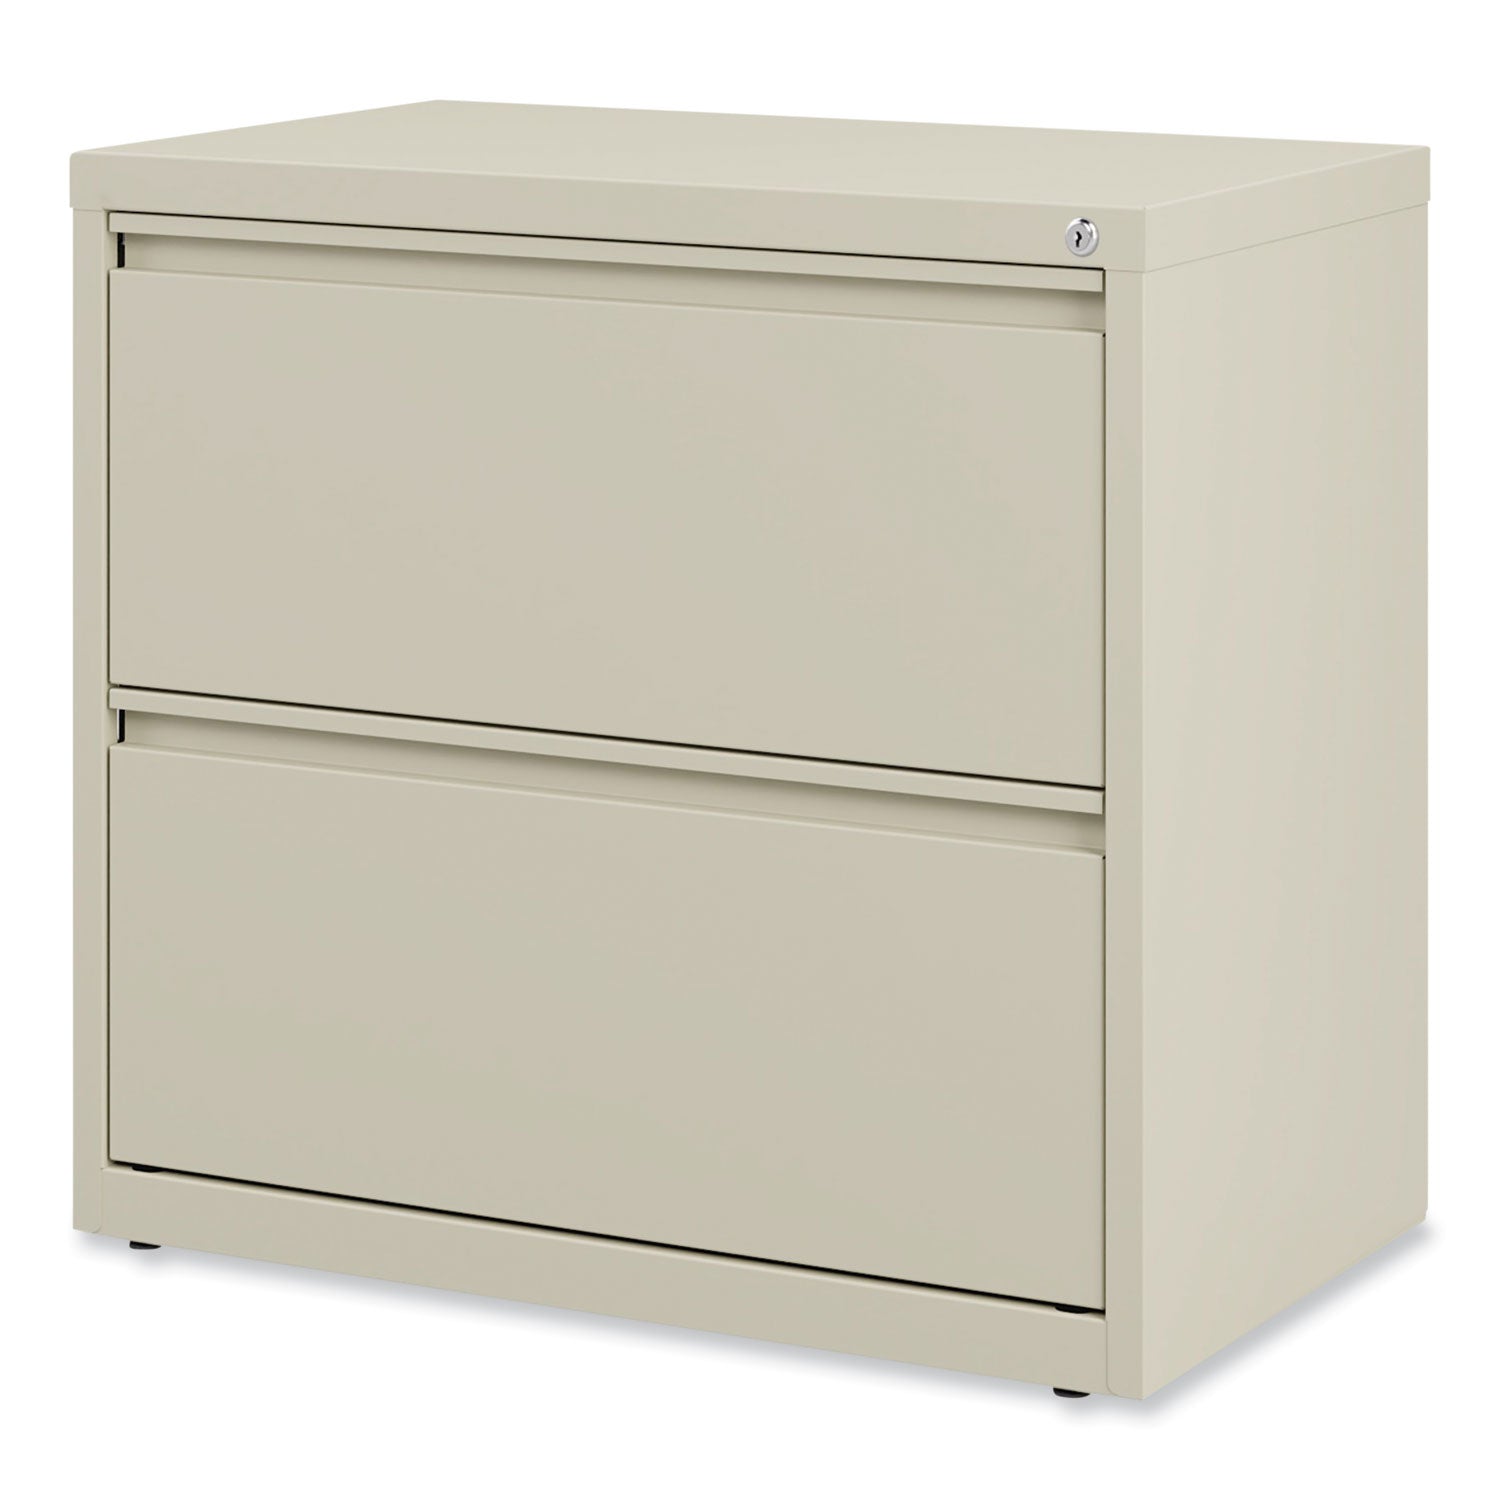 lateral-file-2-legal-letter-size-file-drawers-putty-30-x-1863-x-28_alehlf3029py - 5